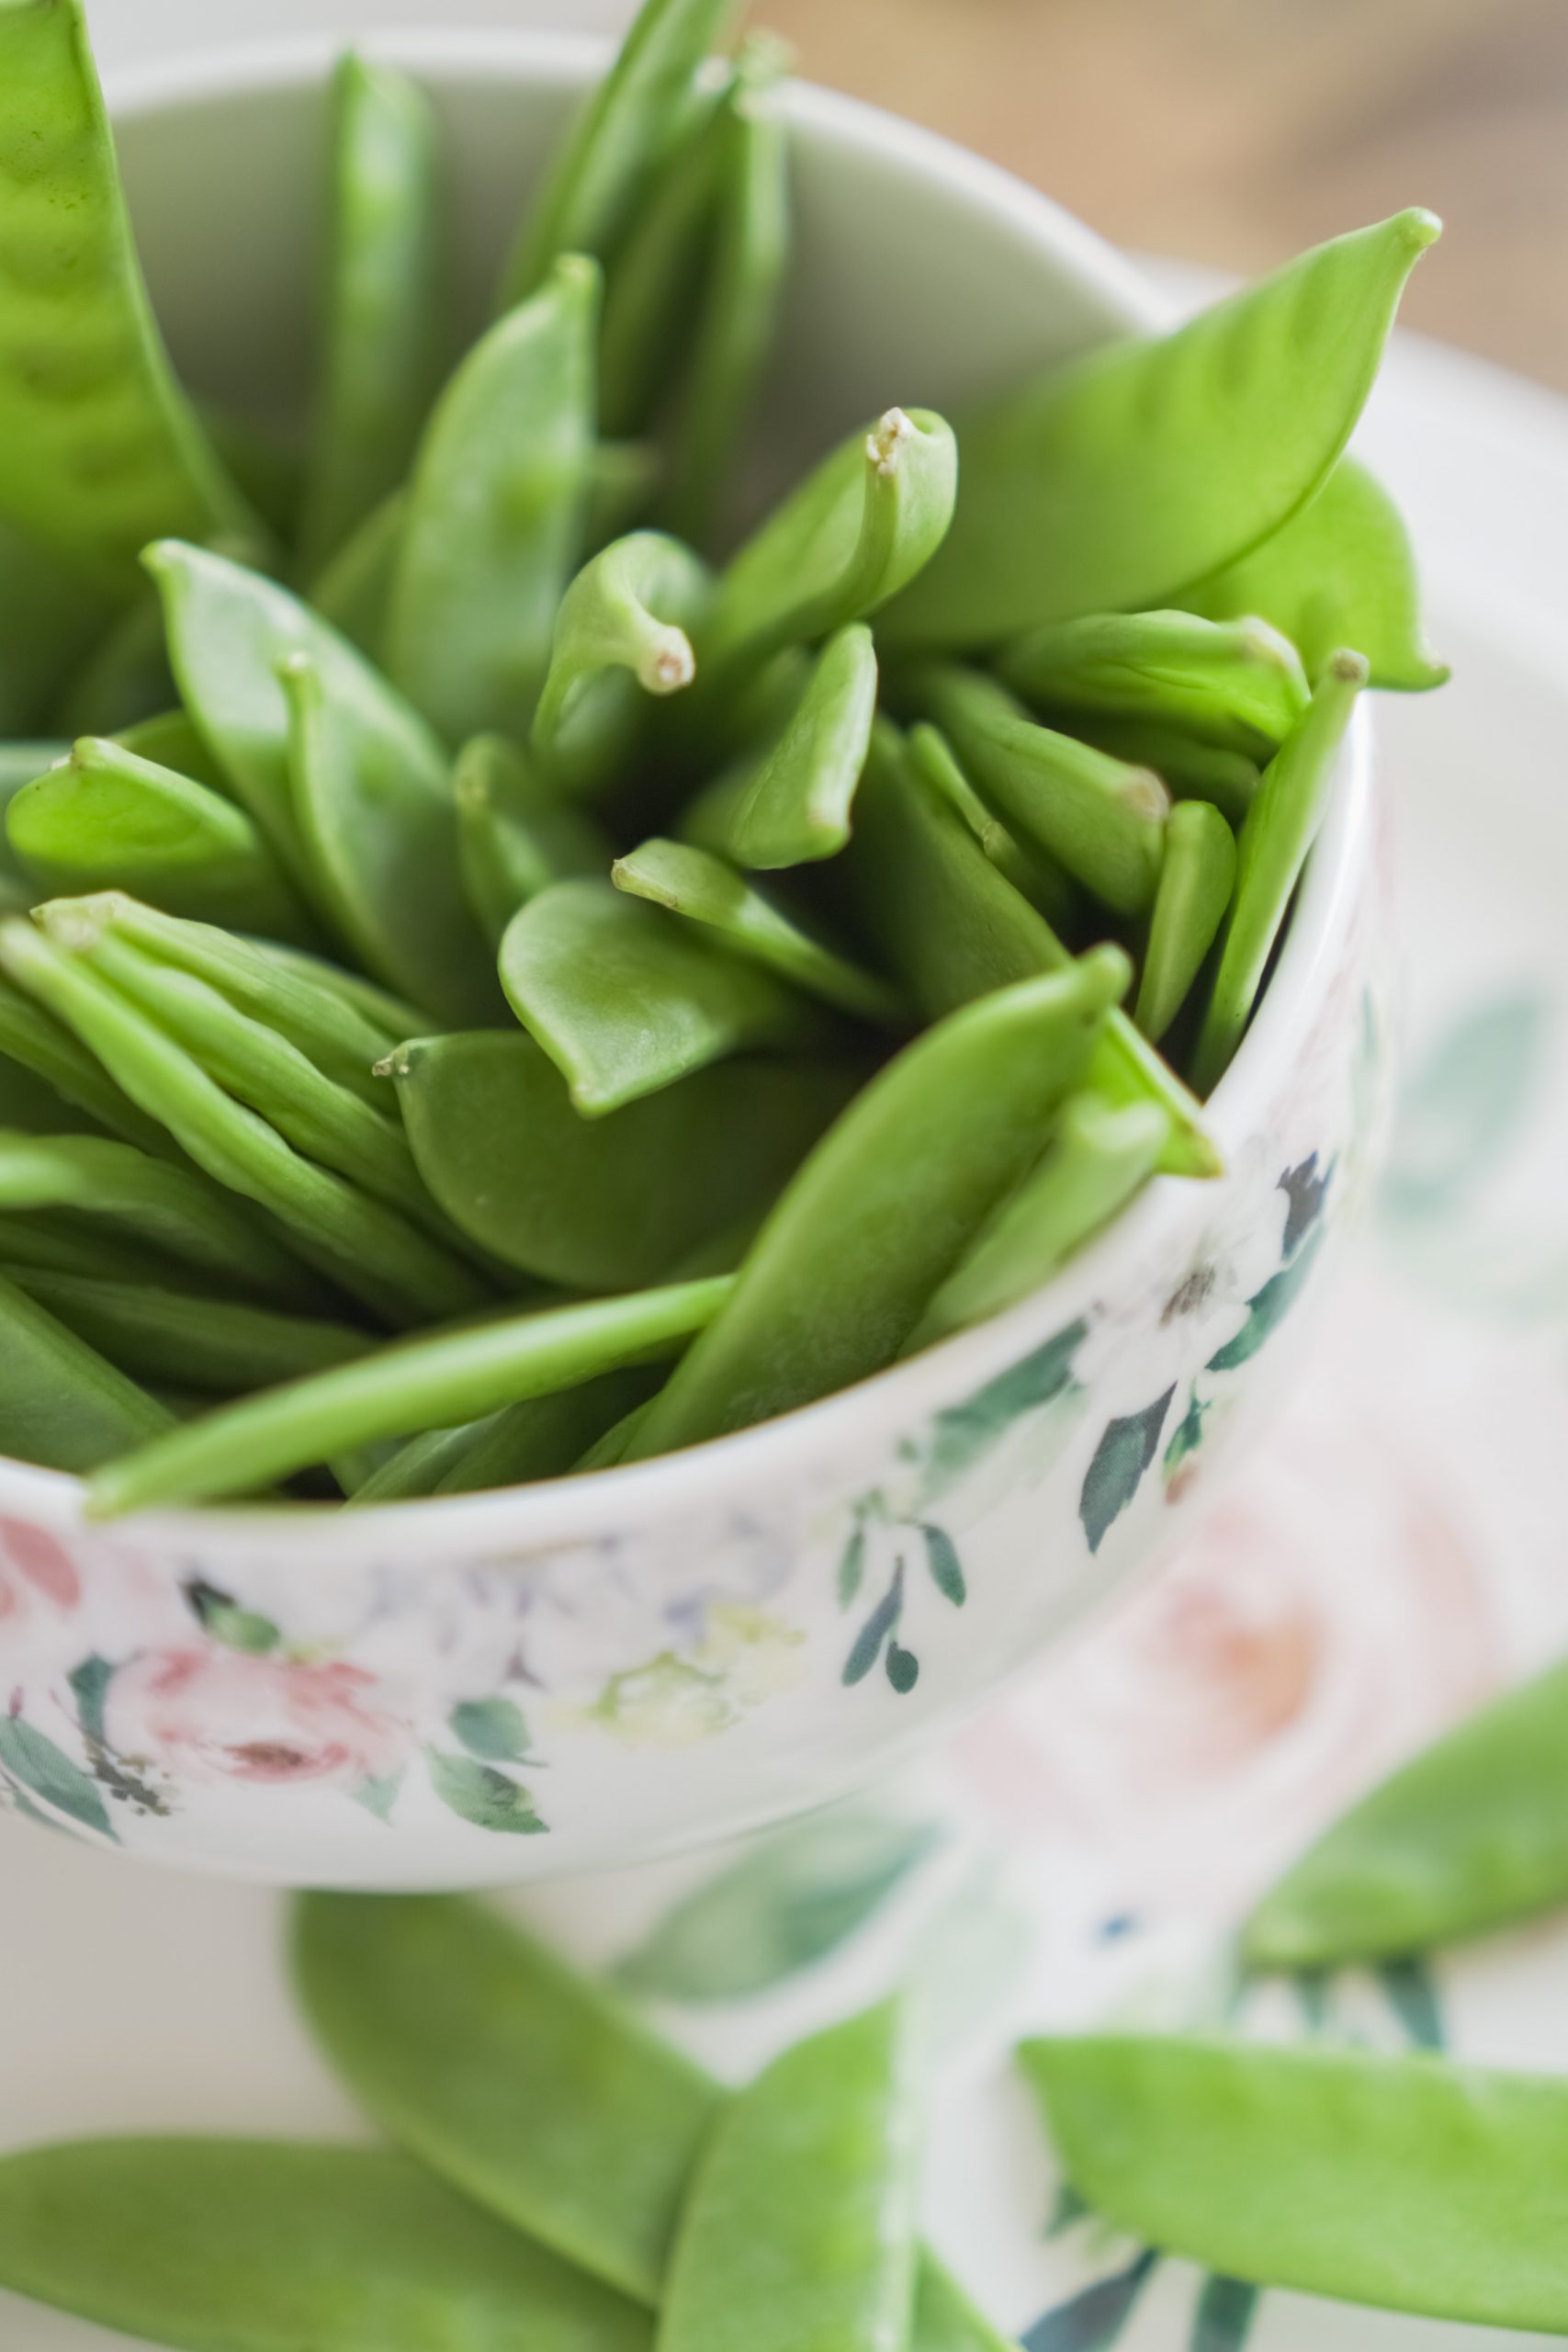 Can You Eat Peas Raw Straight From The Plant? (That Includes Snow Peas)